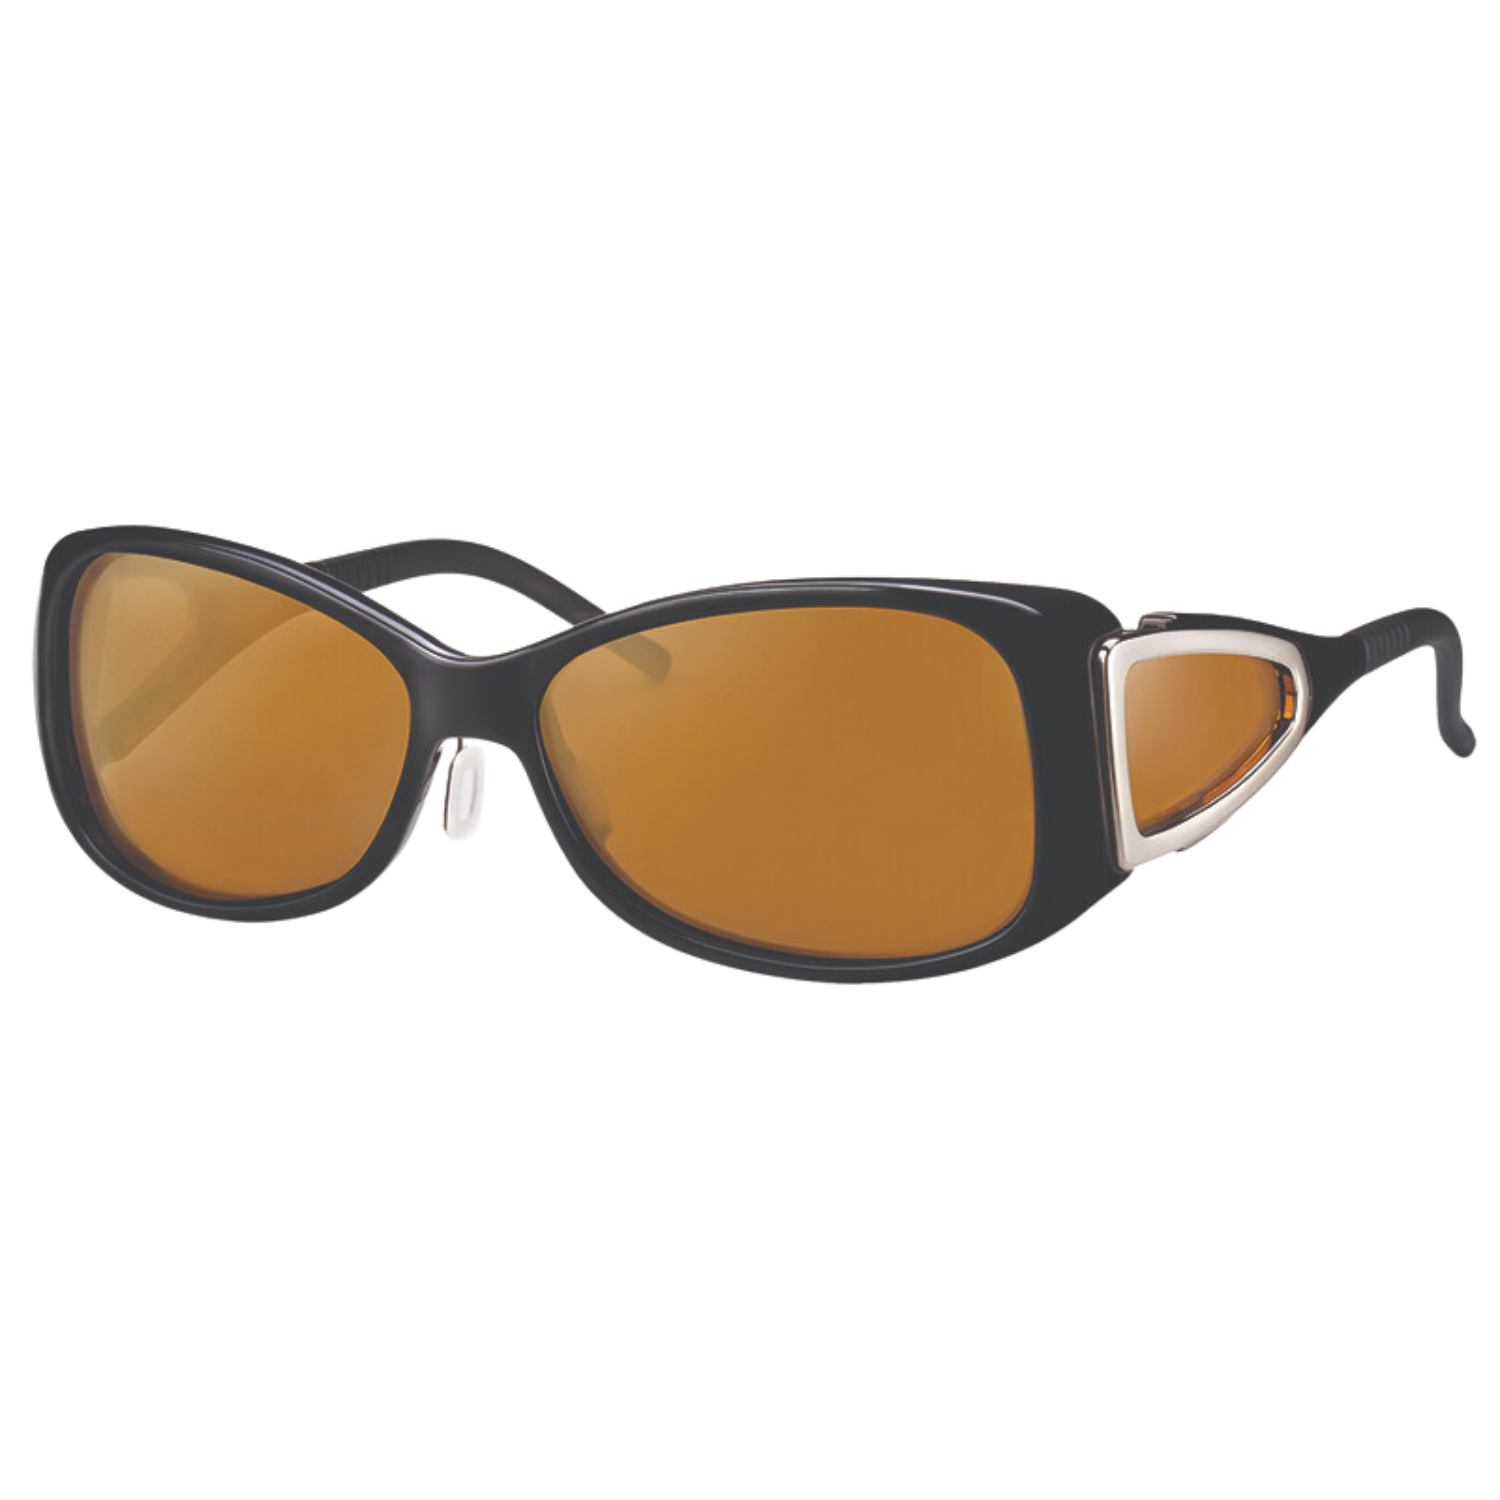 Image of the Ambelis Blue Light Glasses with small womens black frames and amber tint.